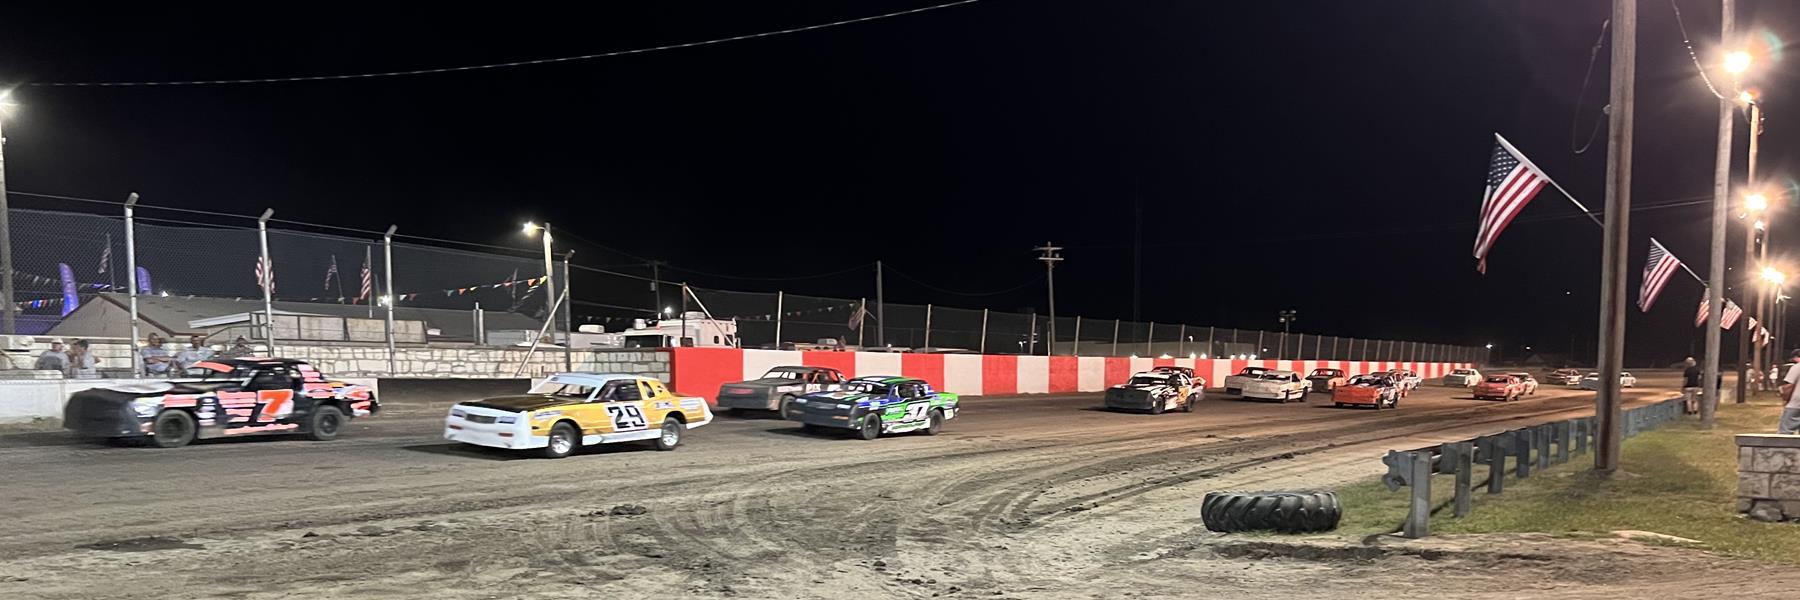 8/17/2018 - Rooks County Speedway